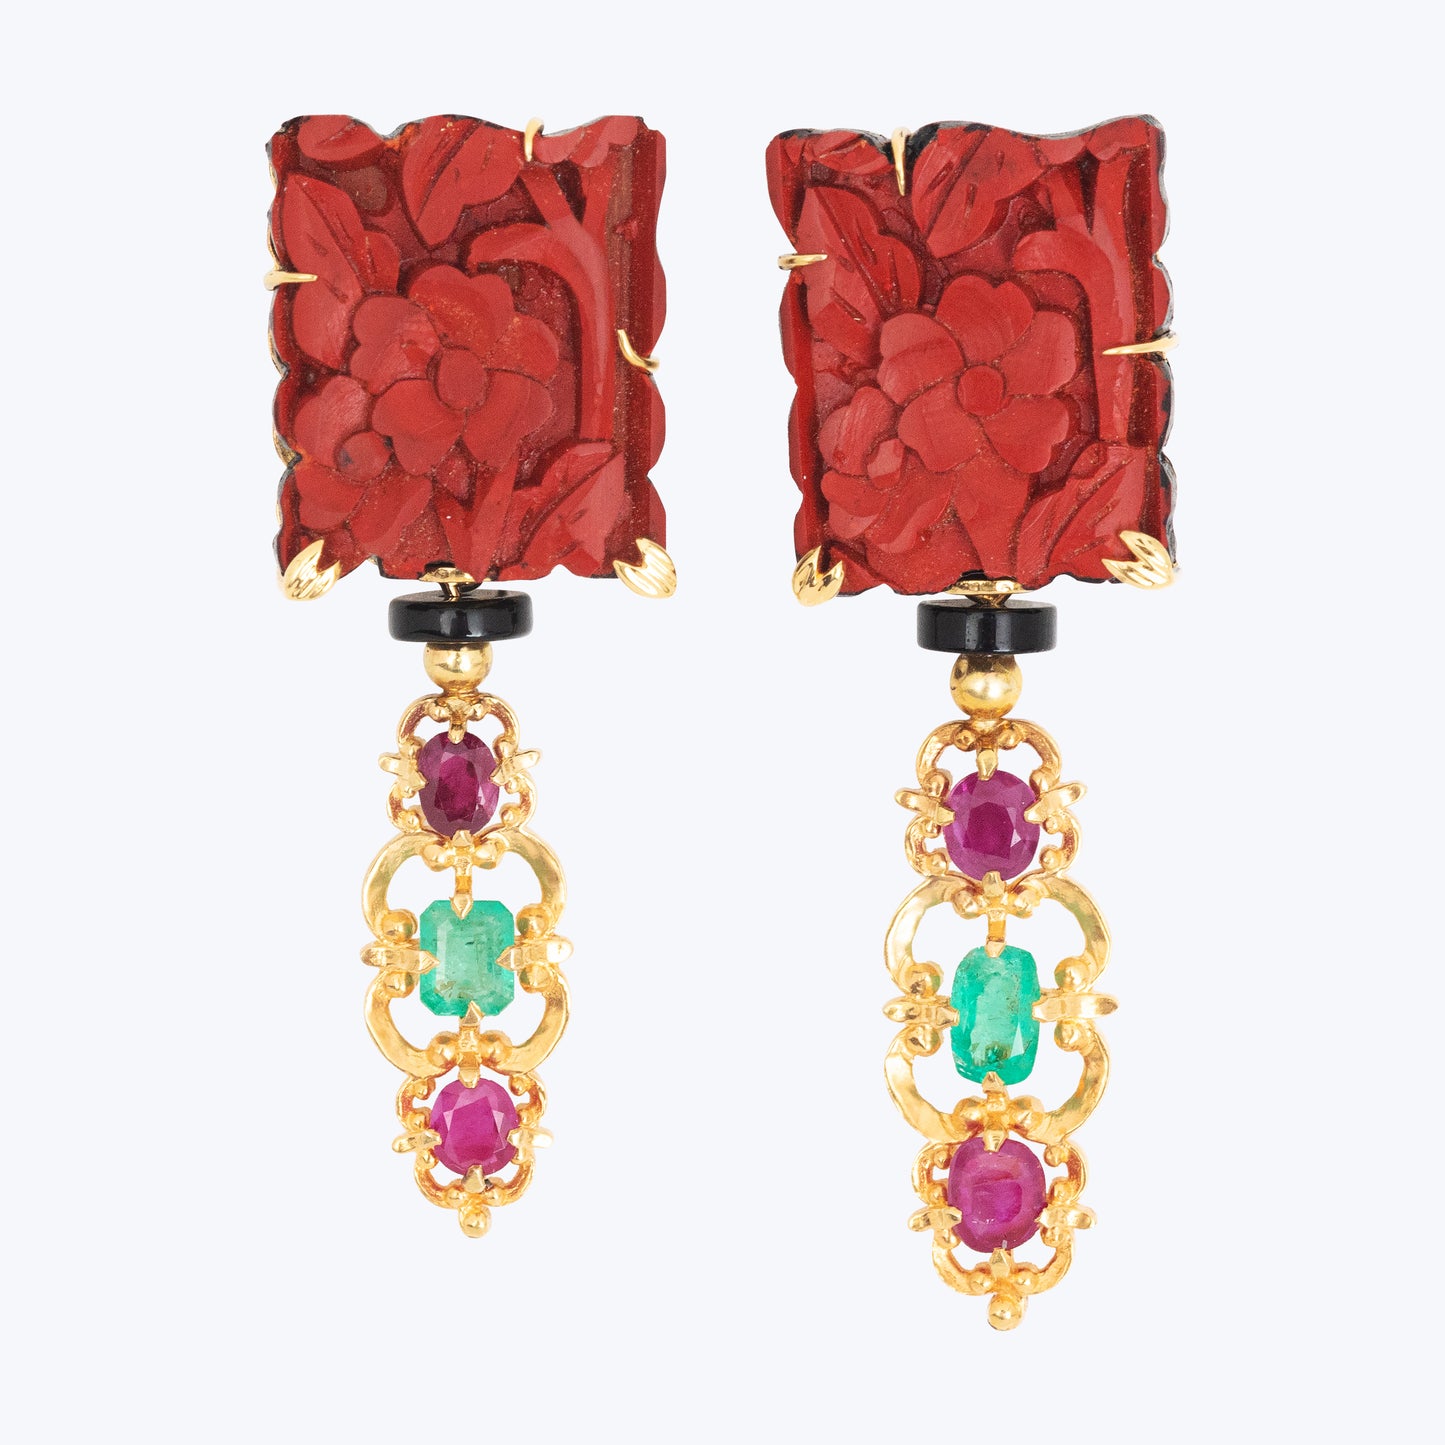 Antique Gold Floral Earrings with Cinnabar Lacquer